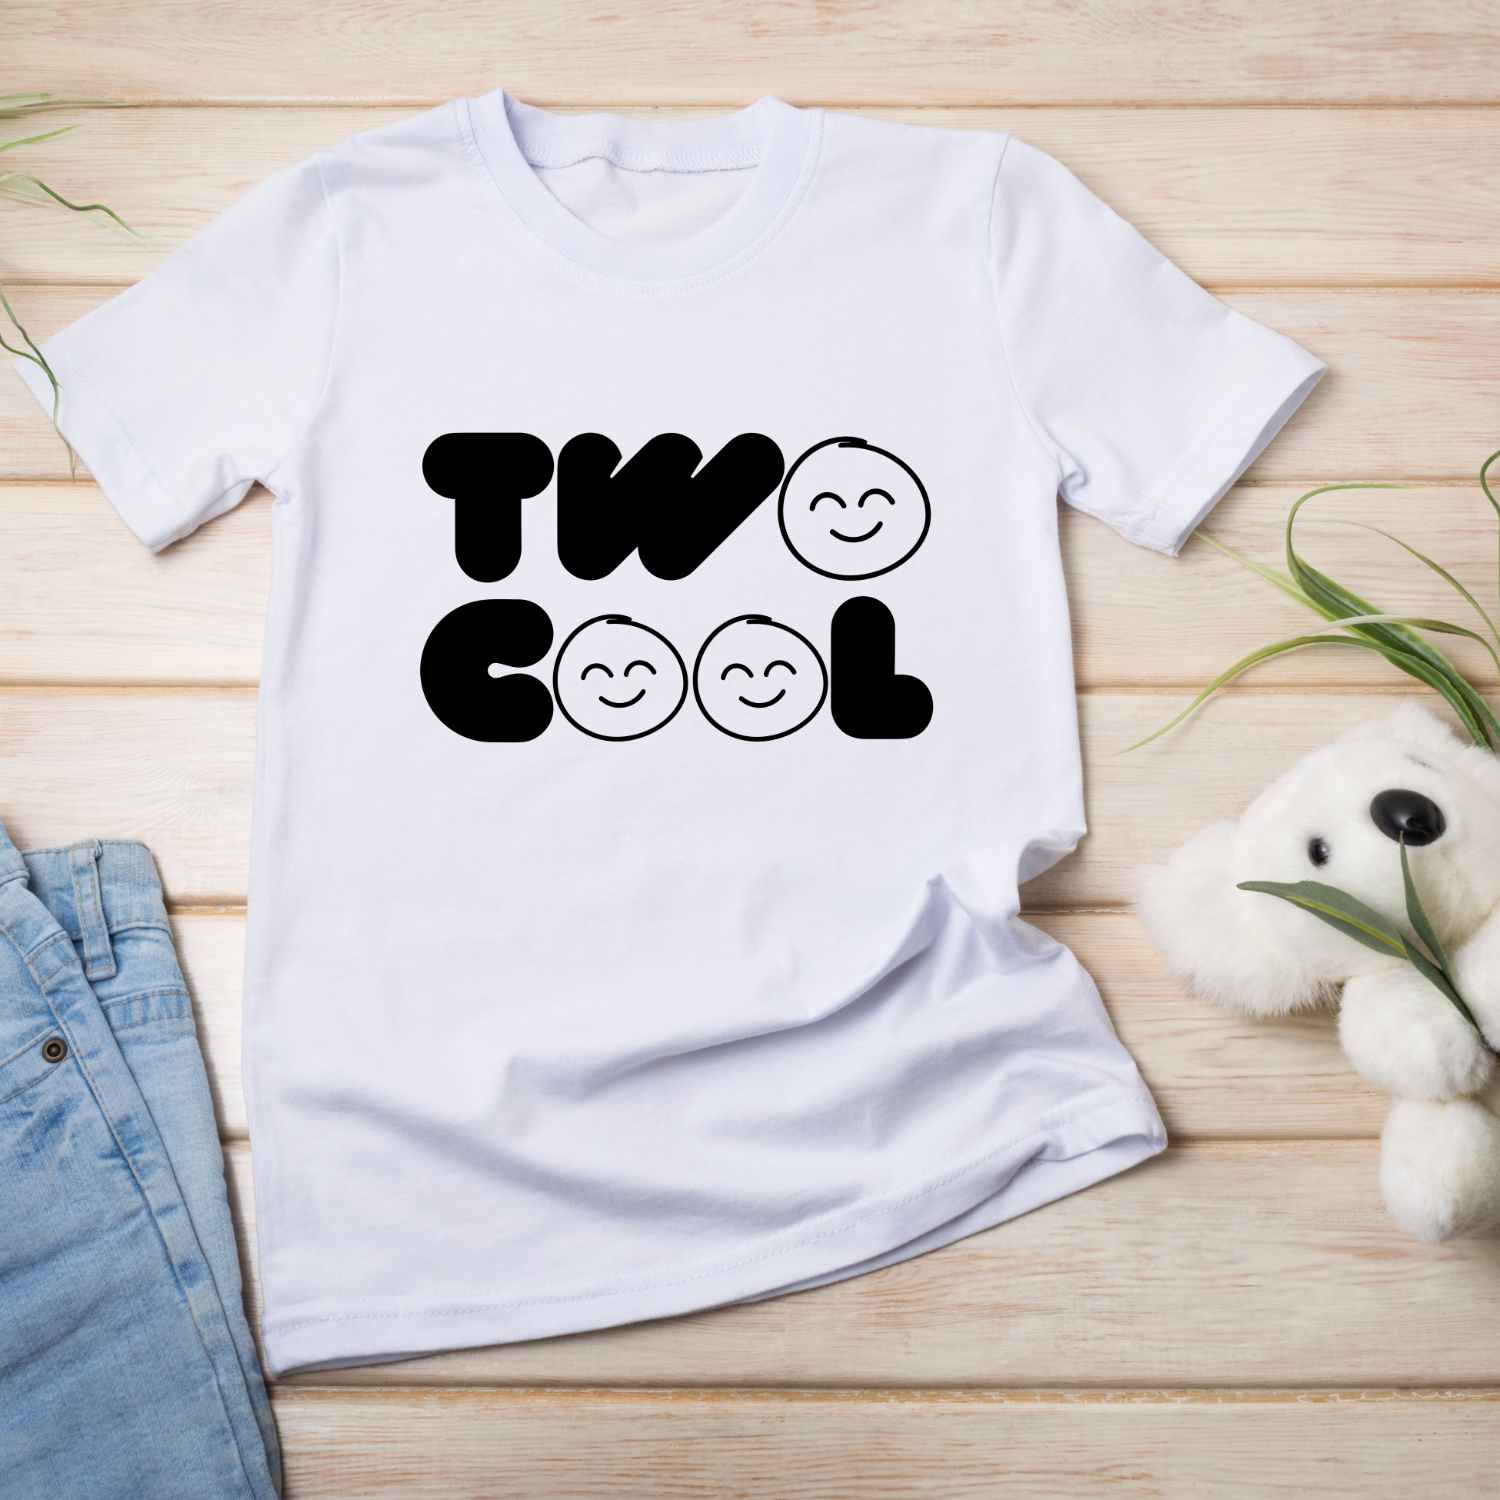 Two Cool Birthday T-shirt design for kids